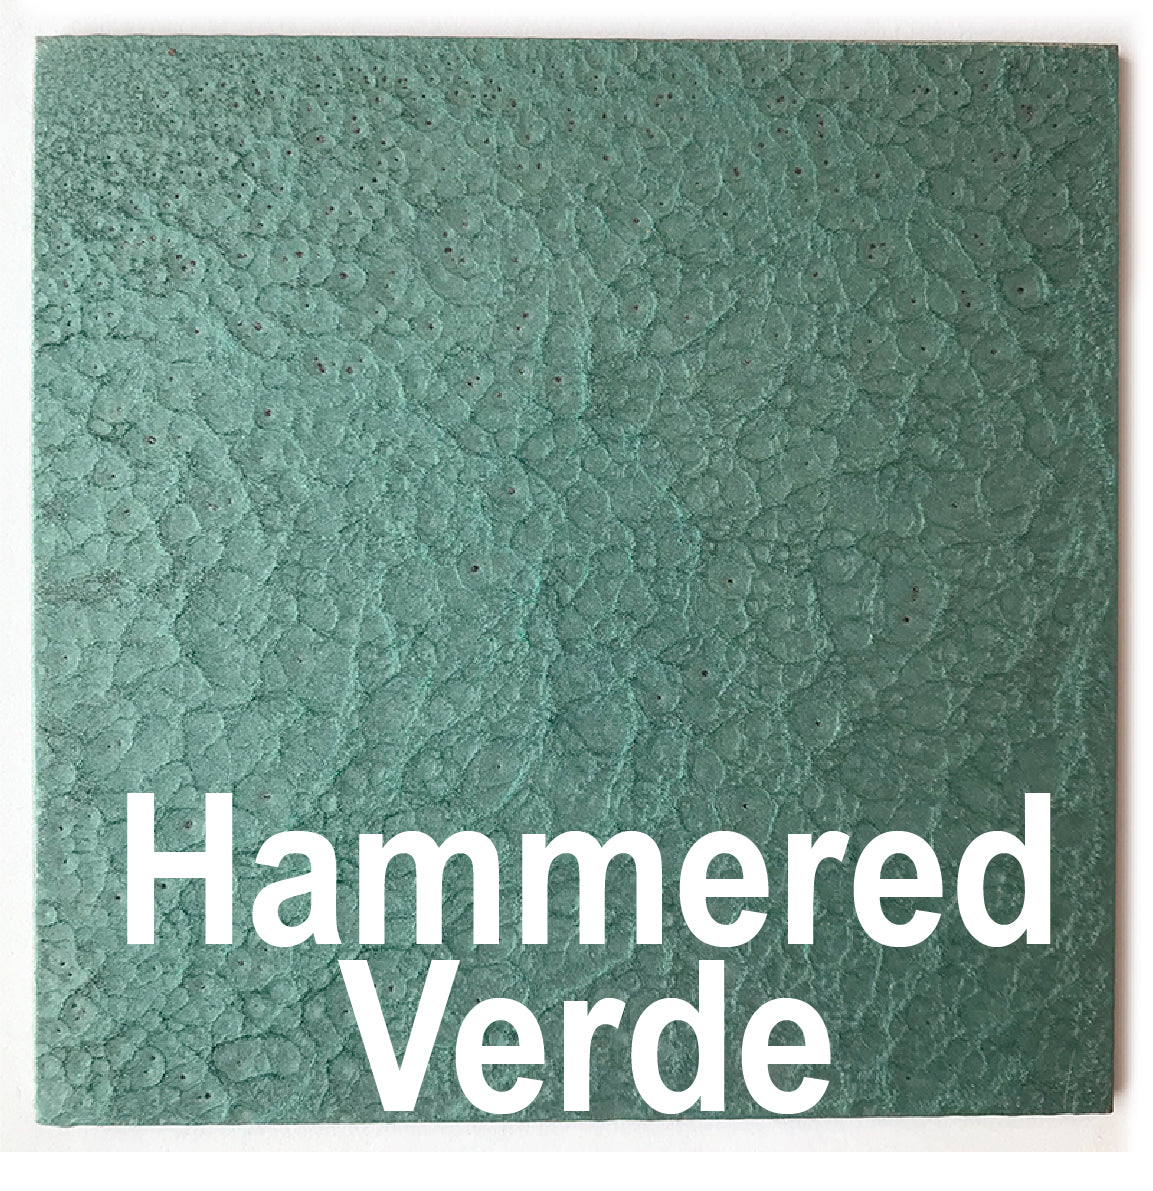 Hammered Verde piece - 3 x 3 Metal Art Color Swatch - Handmade in the USA  - FREE SHIPPING